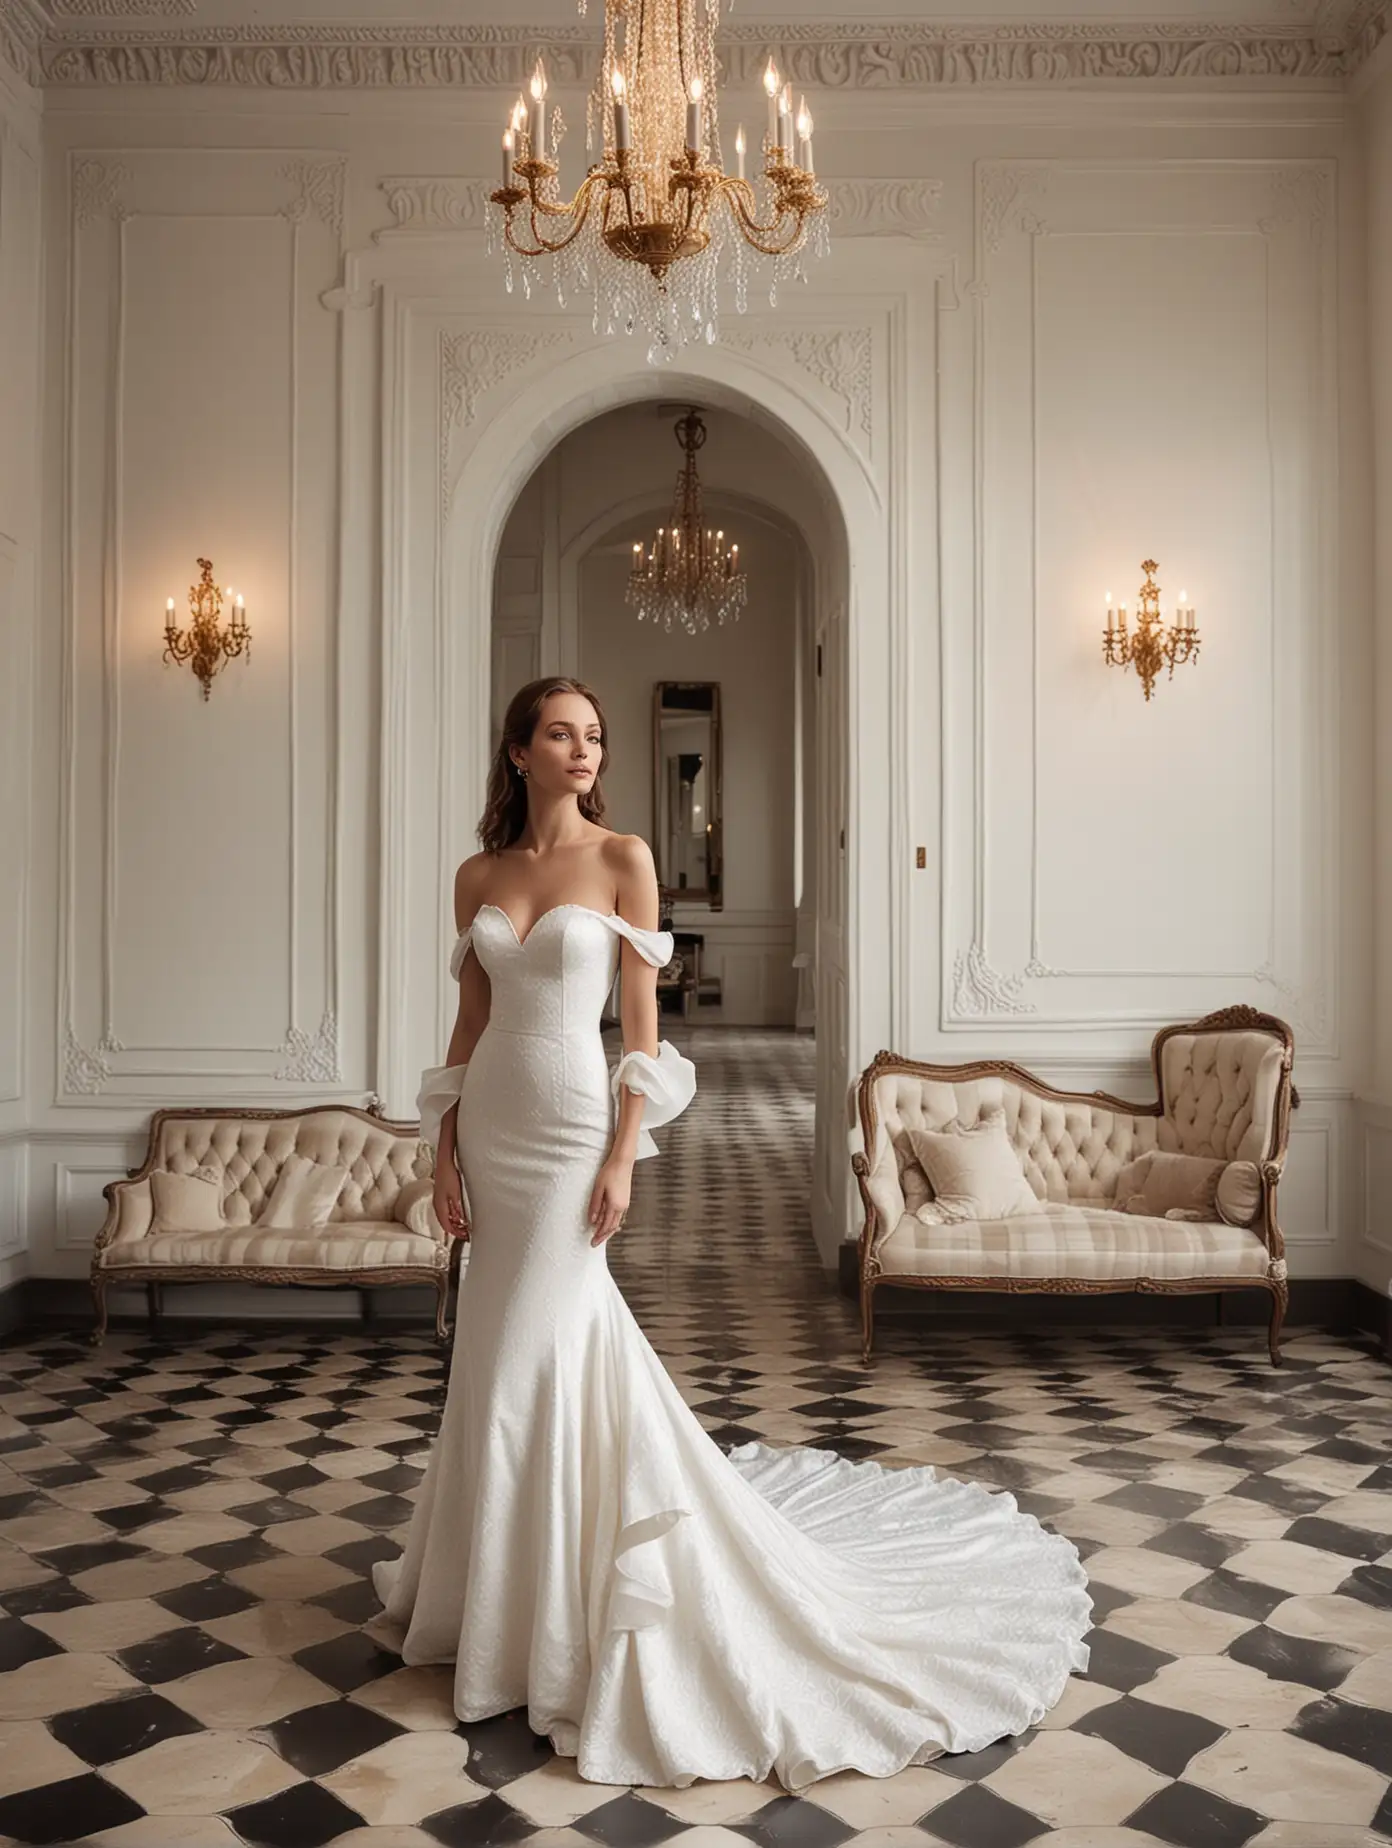 fashion photography of an elegant white mermaid wedding dress with a shoulderless neckline, a simple off-the-shoulder top and train. The gown features flared sleeves at the shoulders, with a fitted bodice that gracefully falls to form its figure-hugging silhouette. It has an eye-catching ruffled detail on one side, adding character while maintaining elegance in simplicity. Standing against a luxurious black and cream checkered floor in front of an ornate wall hanging, in the style of a chandelier.